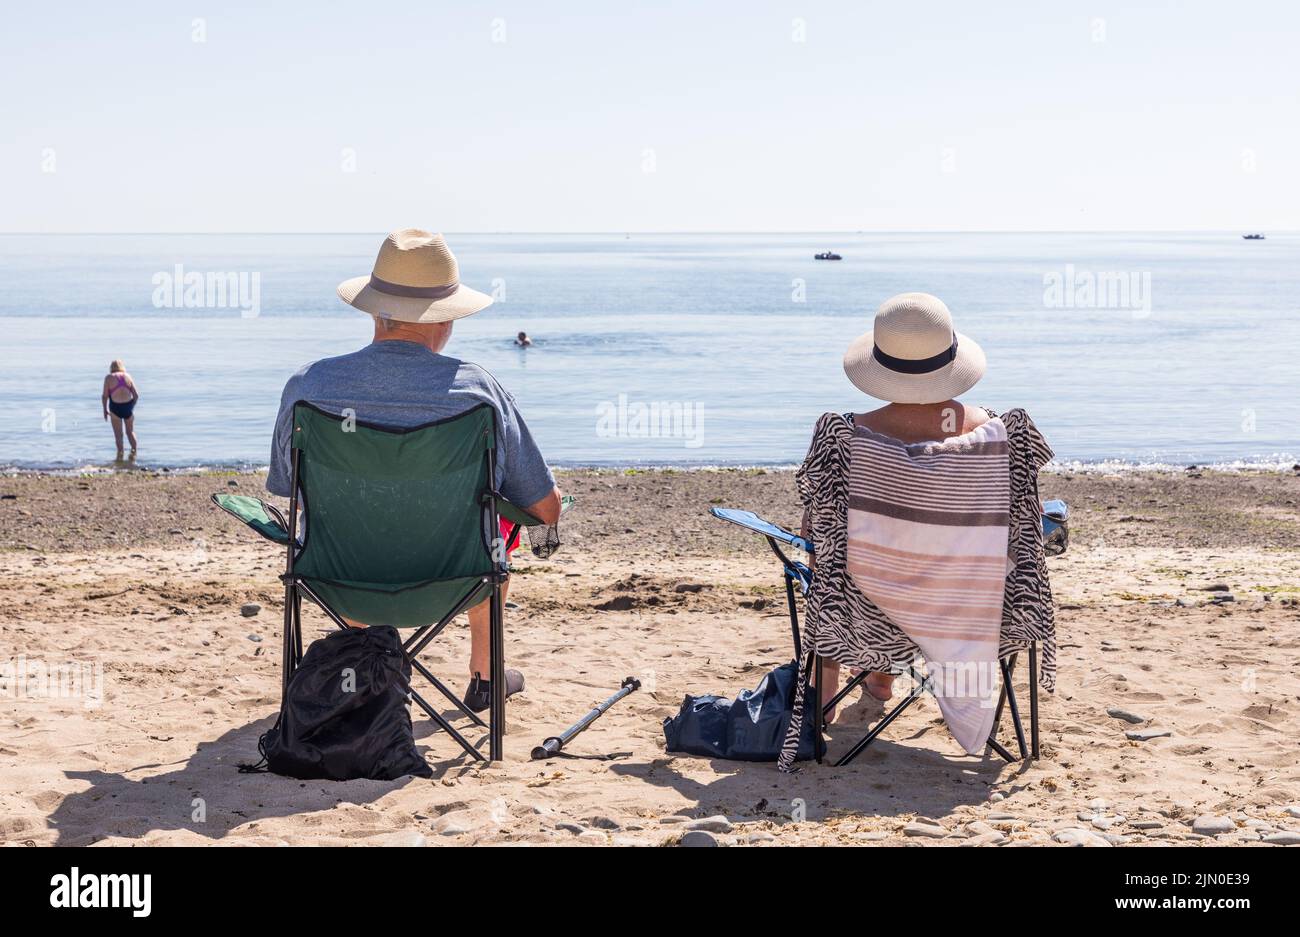 Fountainstown, Cork, Ireland. 08th August, 2022. With temperatures expected to hit the mid twenties, pensioners John and Anne Lemasney of Templebreedy took the opportunity for some morning sunbathing before it got too hot at Fountainstown Beach, Co. Cork, Ireland. - Credit; David Creedon / Alamy Live News Stock Photo